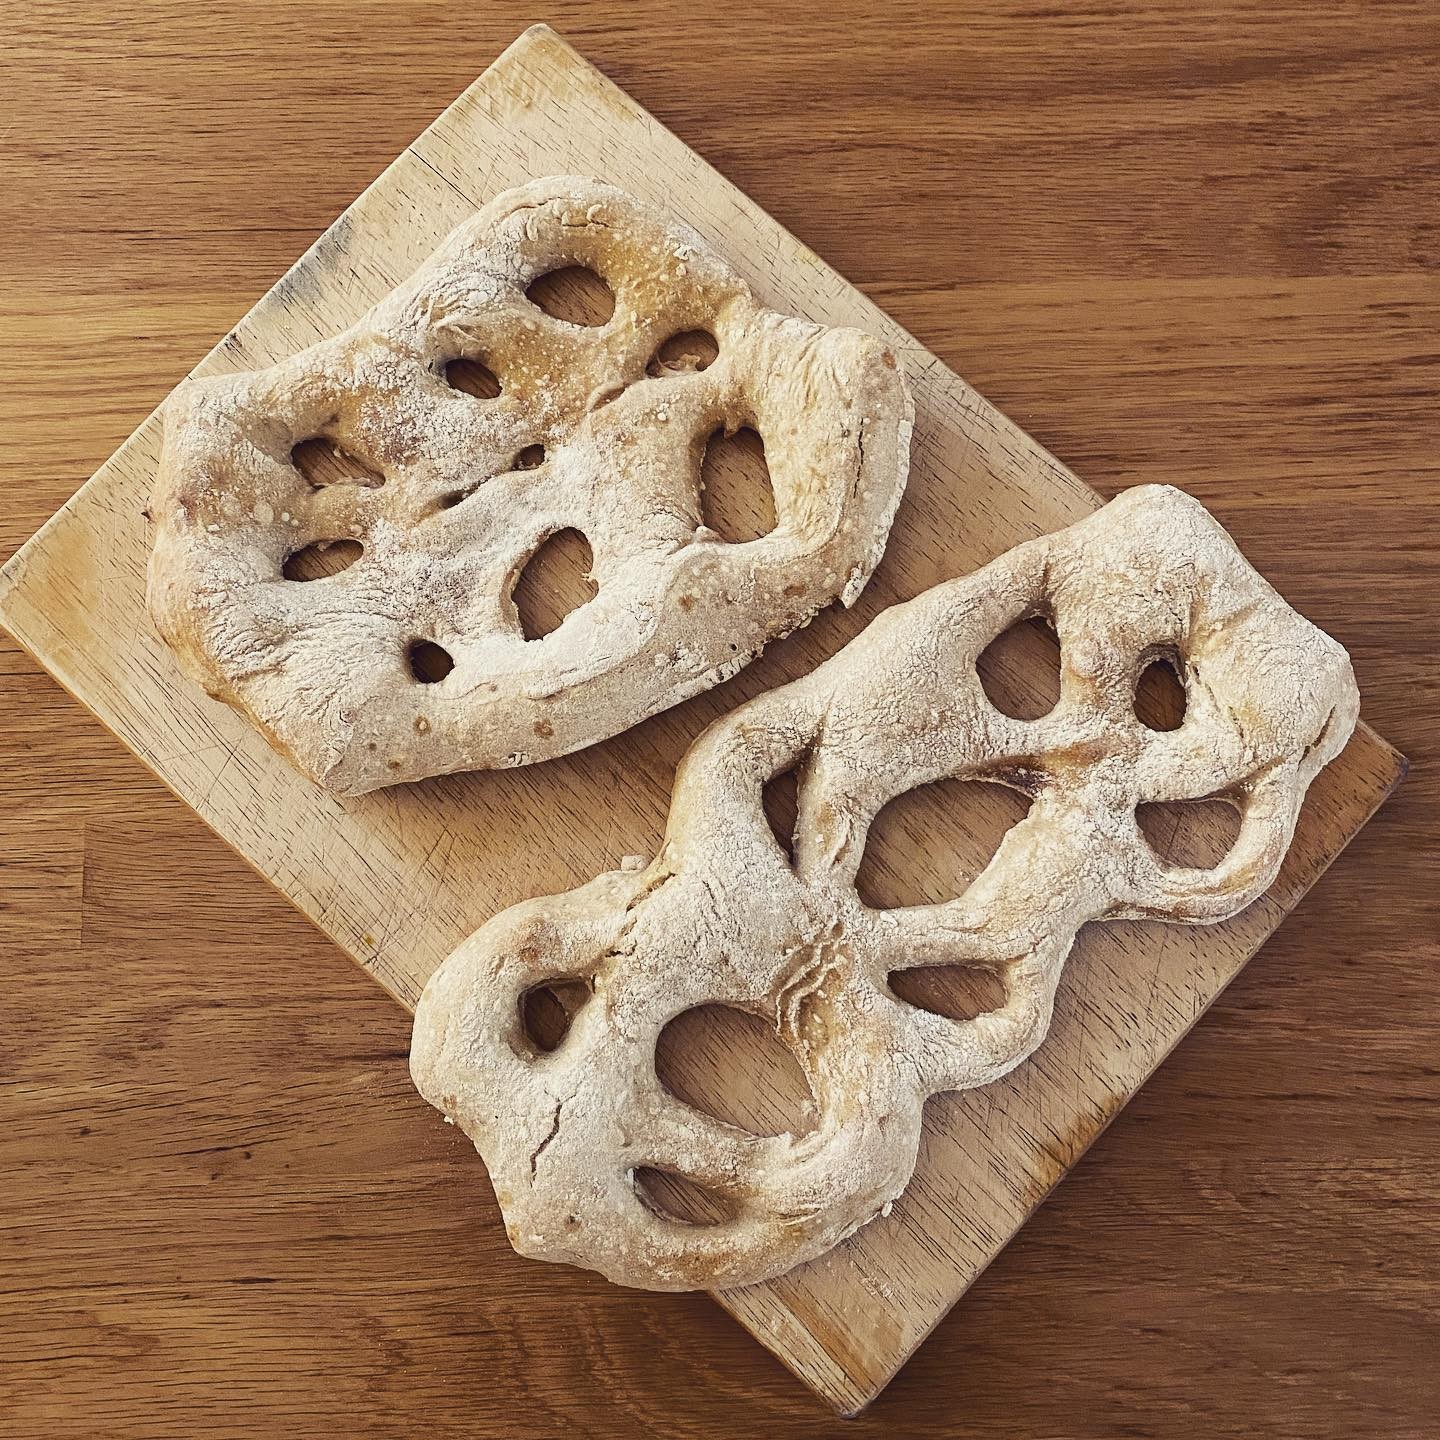 New style bread inspired by Christmas reading. 
Made by my husband, eaten by me. This is how we usually do it… although of course I had to share some. 😋😋 extra yummy treat - similar to ciabatta I would say. And was gone in about 10mins…

⠀⠀⠀⠀⠀⠀⠀⠀⠀⠀
⠀⠀⠀⠀⠀⠀⠀⠀⠀⠀
#plantbased #homecooked #homemade #crueltyfree #ahimsa #Vegan #veganlife #veganuk #vegangirl #veganlove #vegancommunity #govegan #veganfood #veganlondon #veganlondoner #bodyheartmind